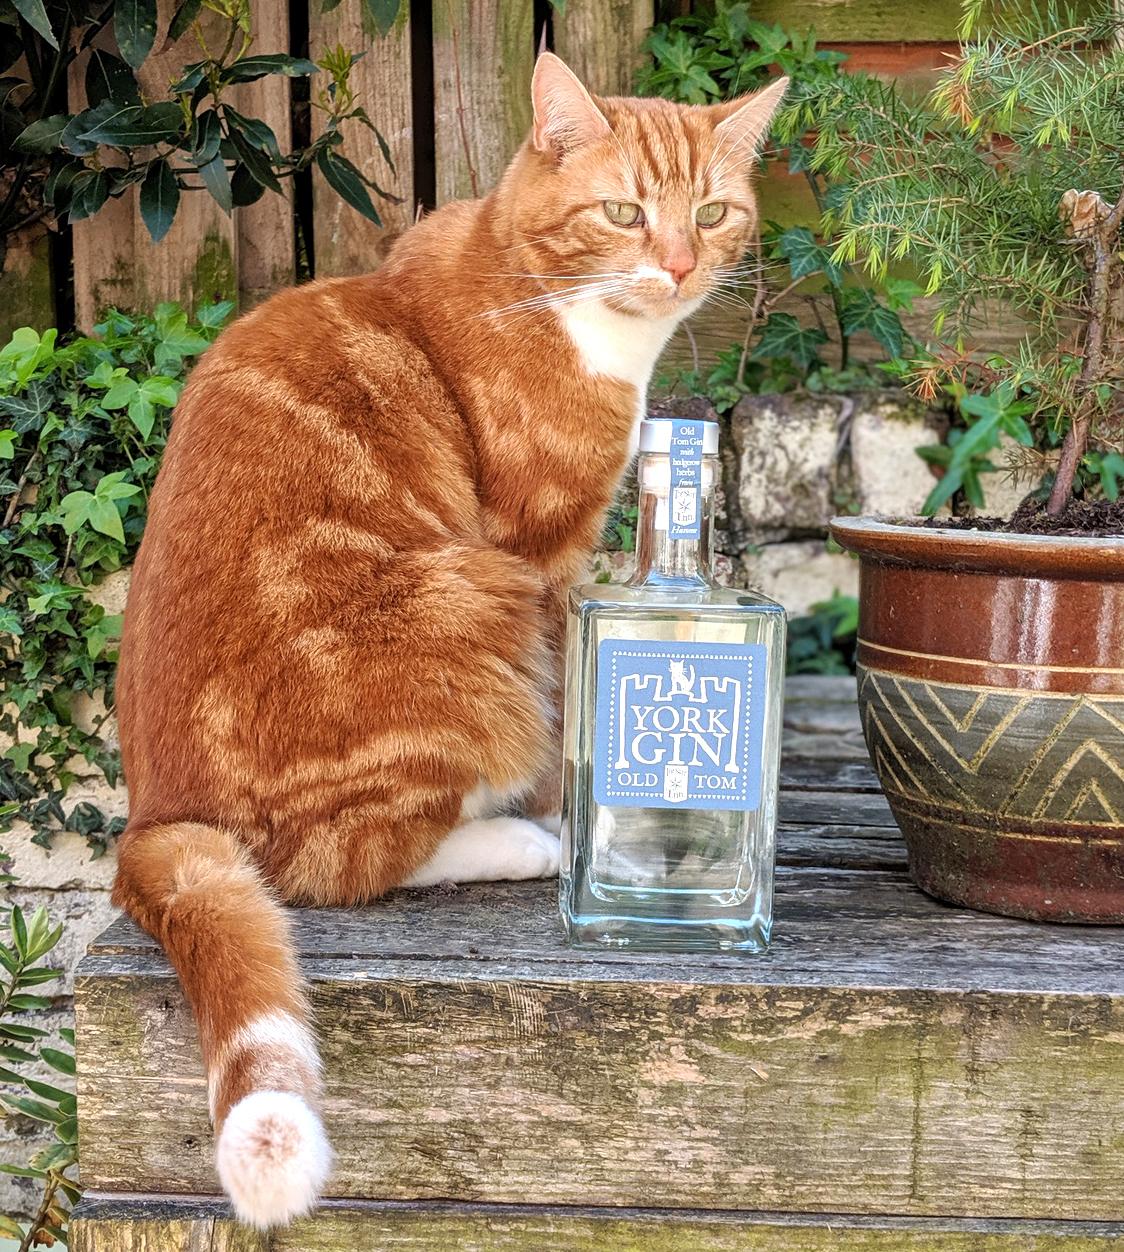 New cat-inspired Gin launched with help of top chef photo